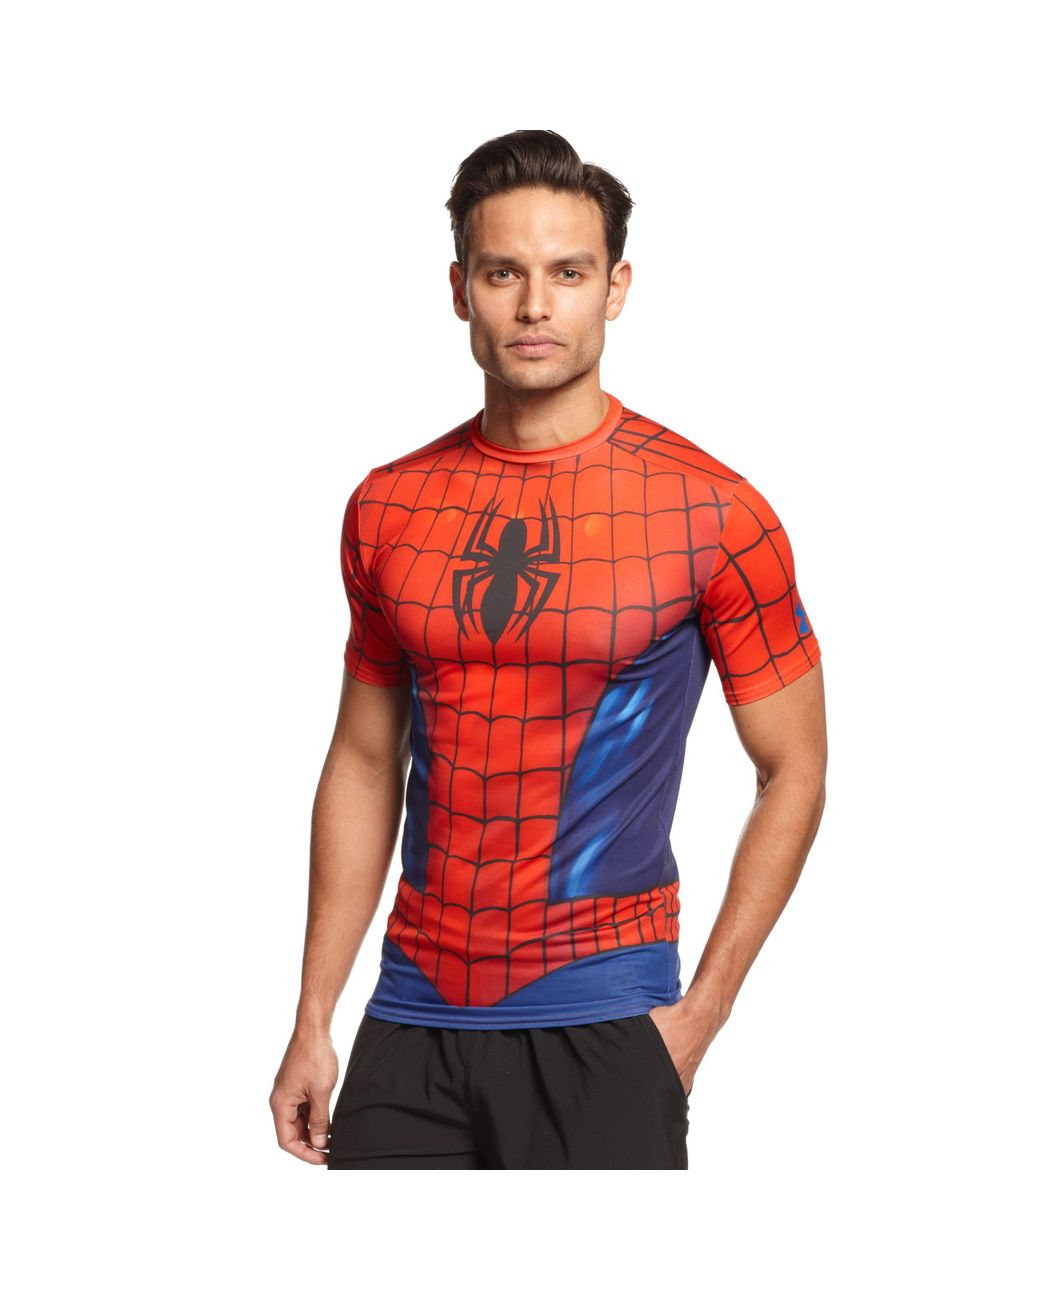 Details about   Under Armour Boys' Alter Ego Spider-Man Fitted  Compression Shirt NEW 